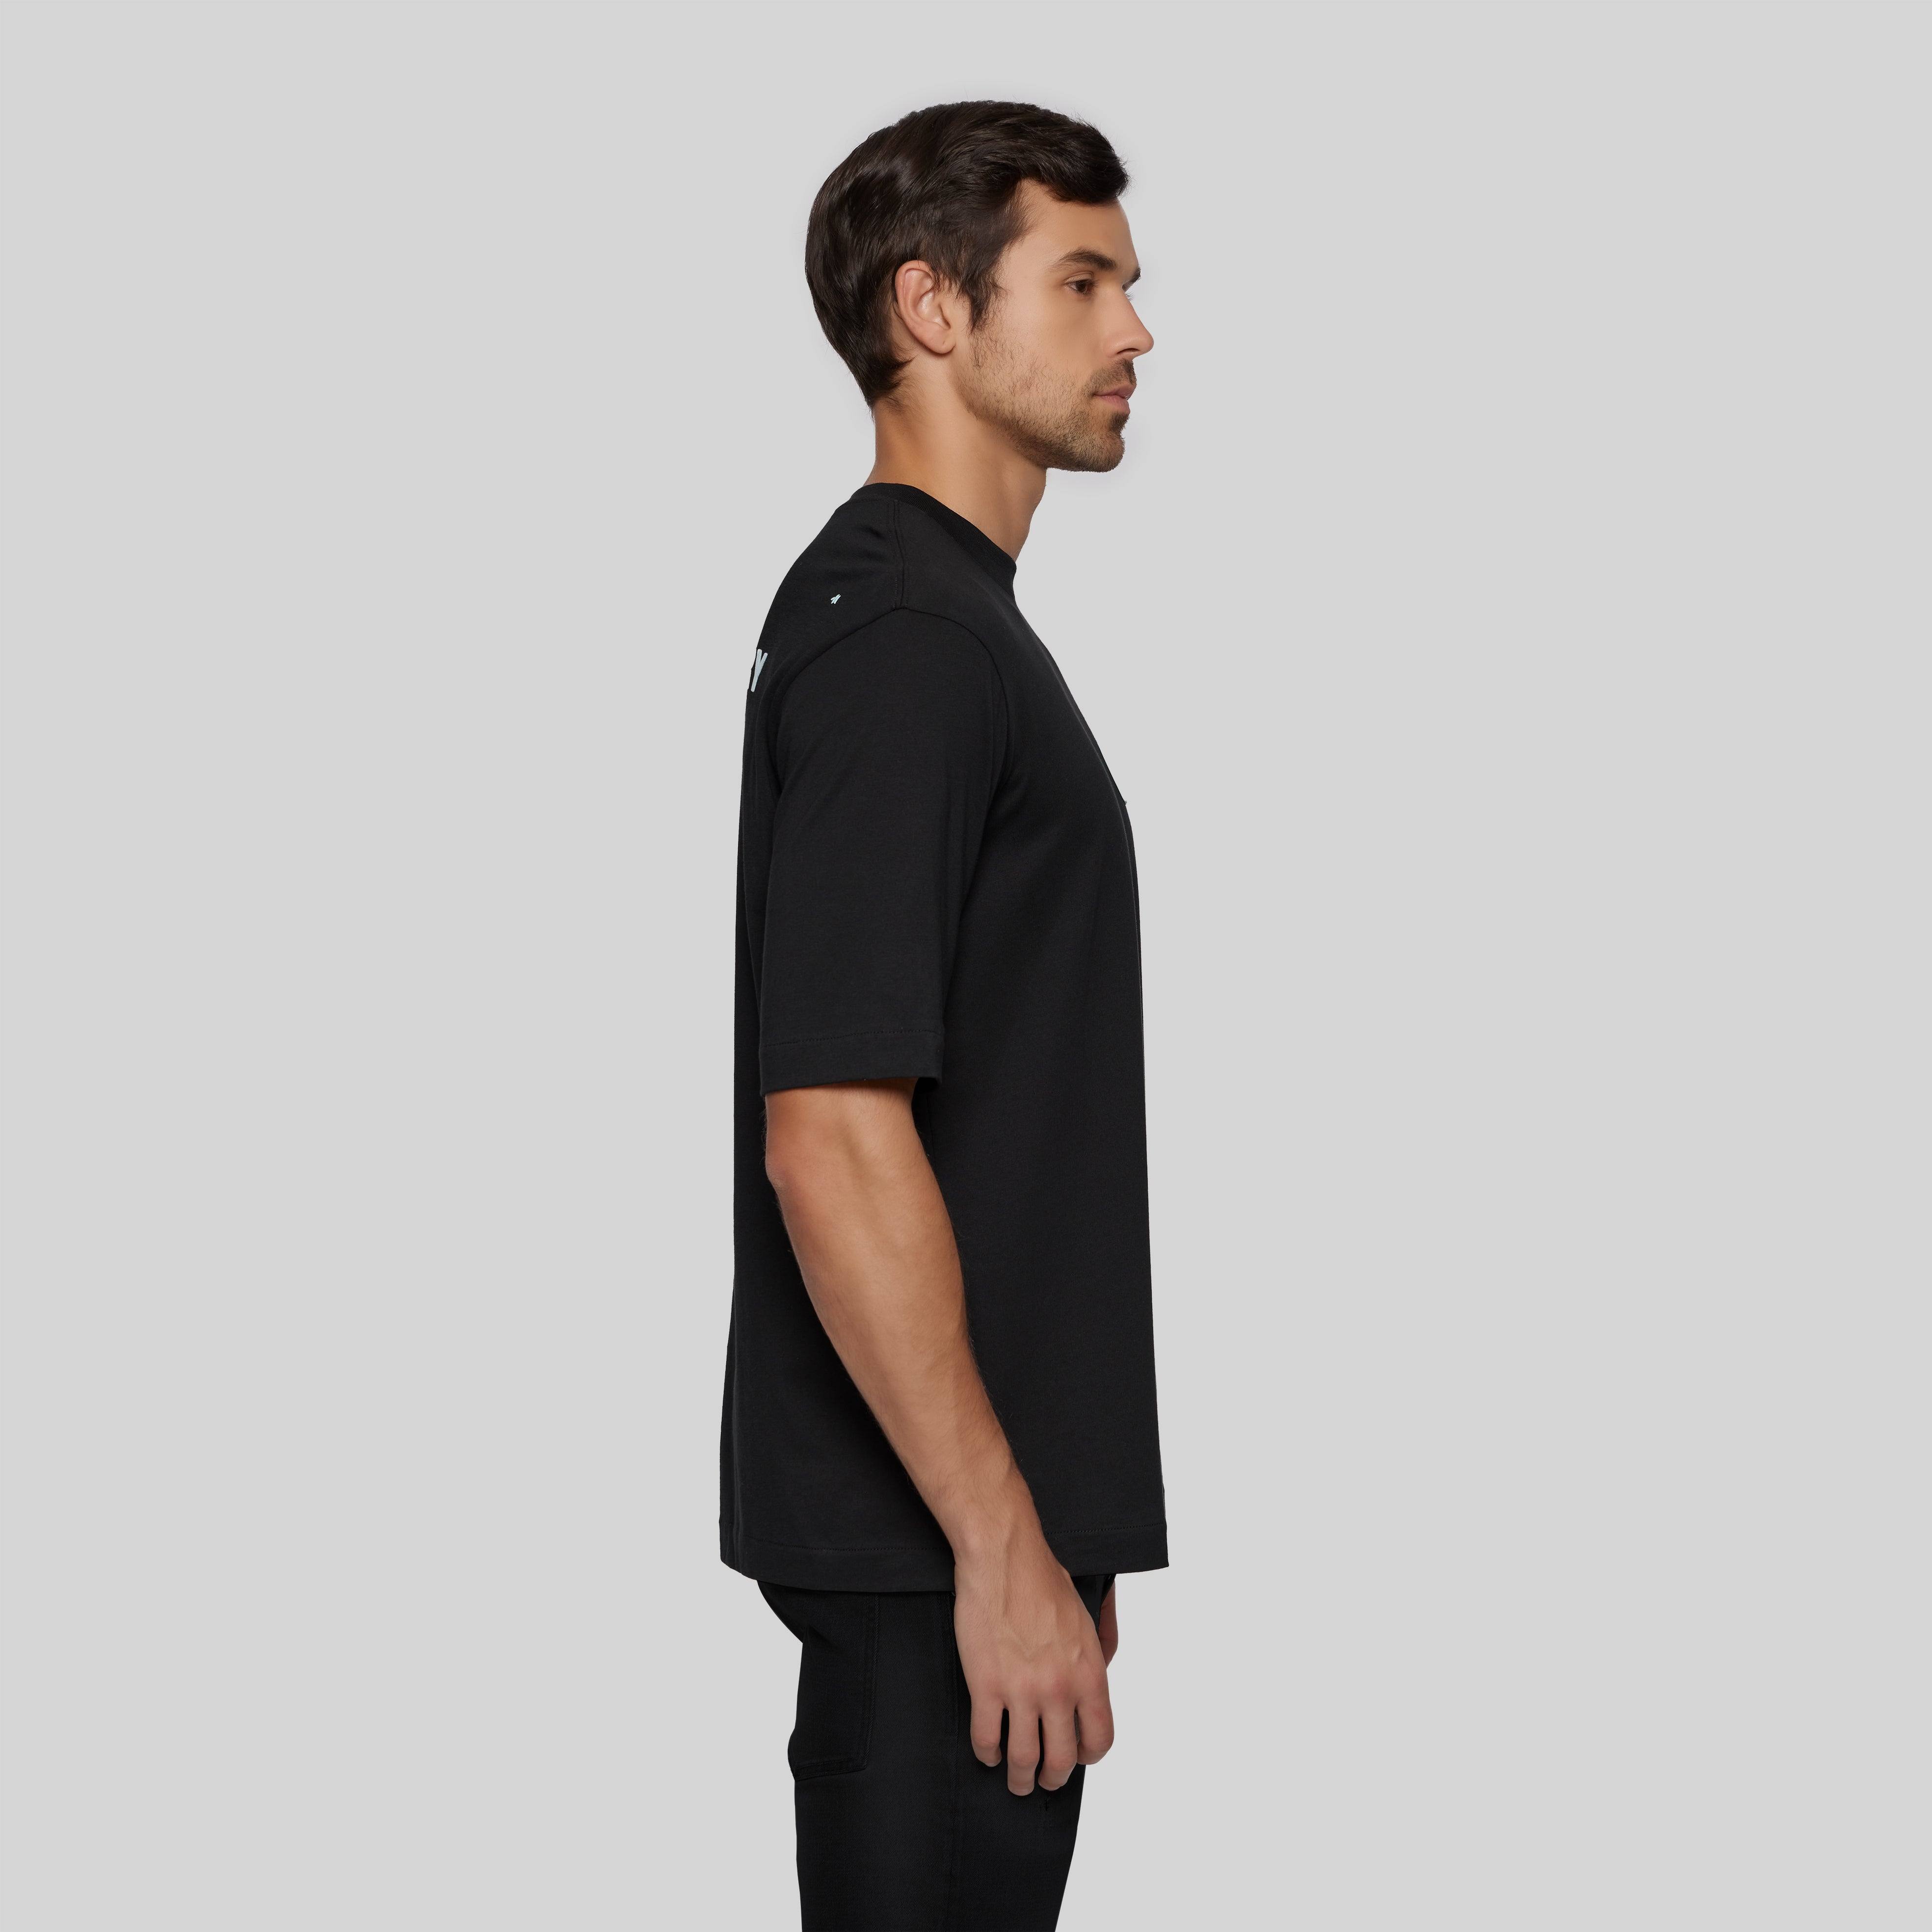 ORUX BLACK T-SHIRT OVERSIZE | Monastery Couture